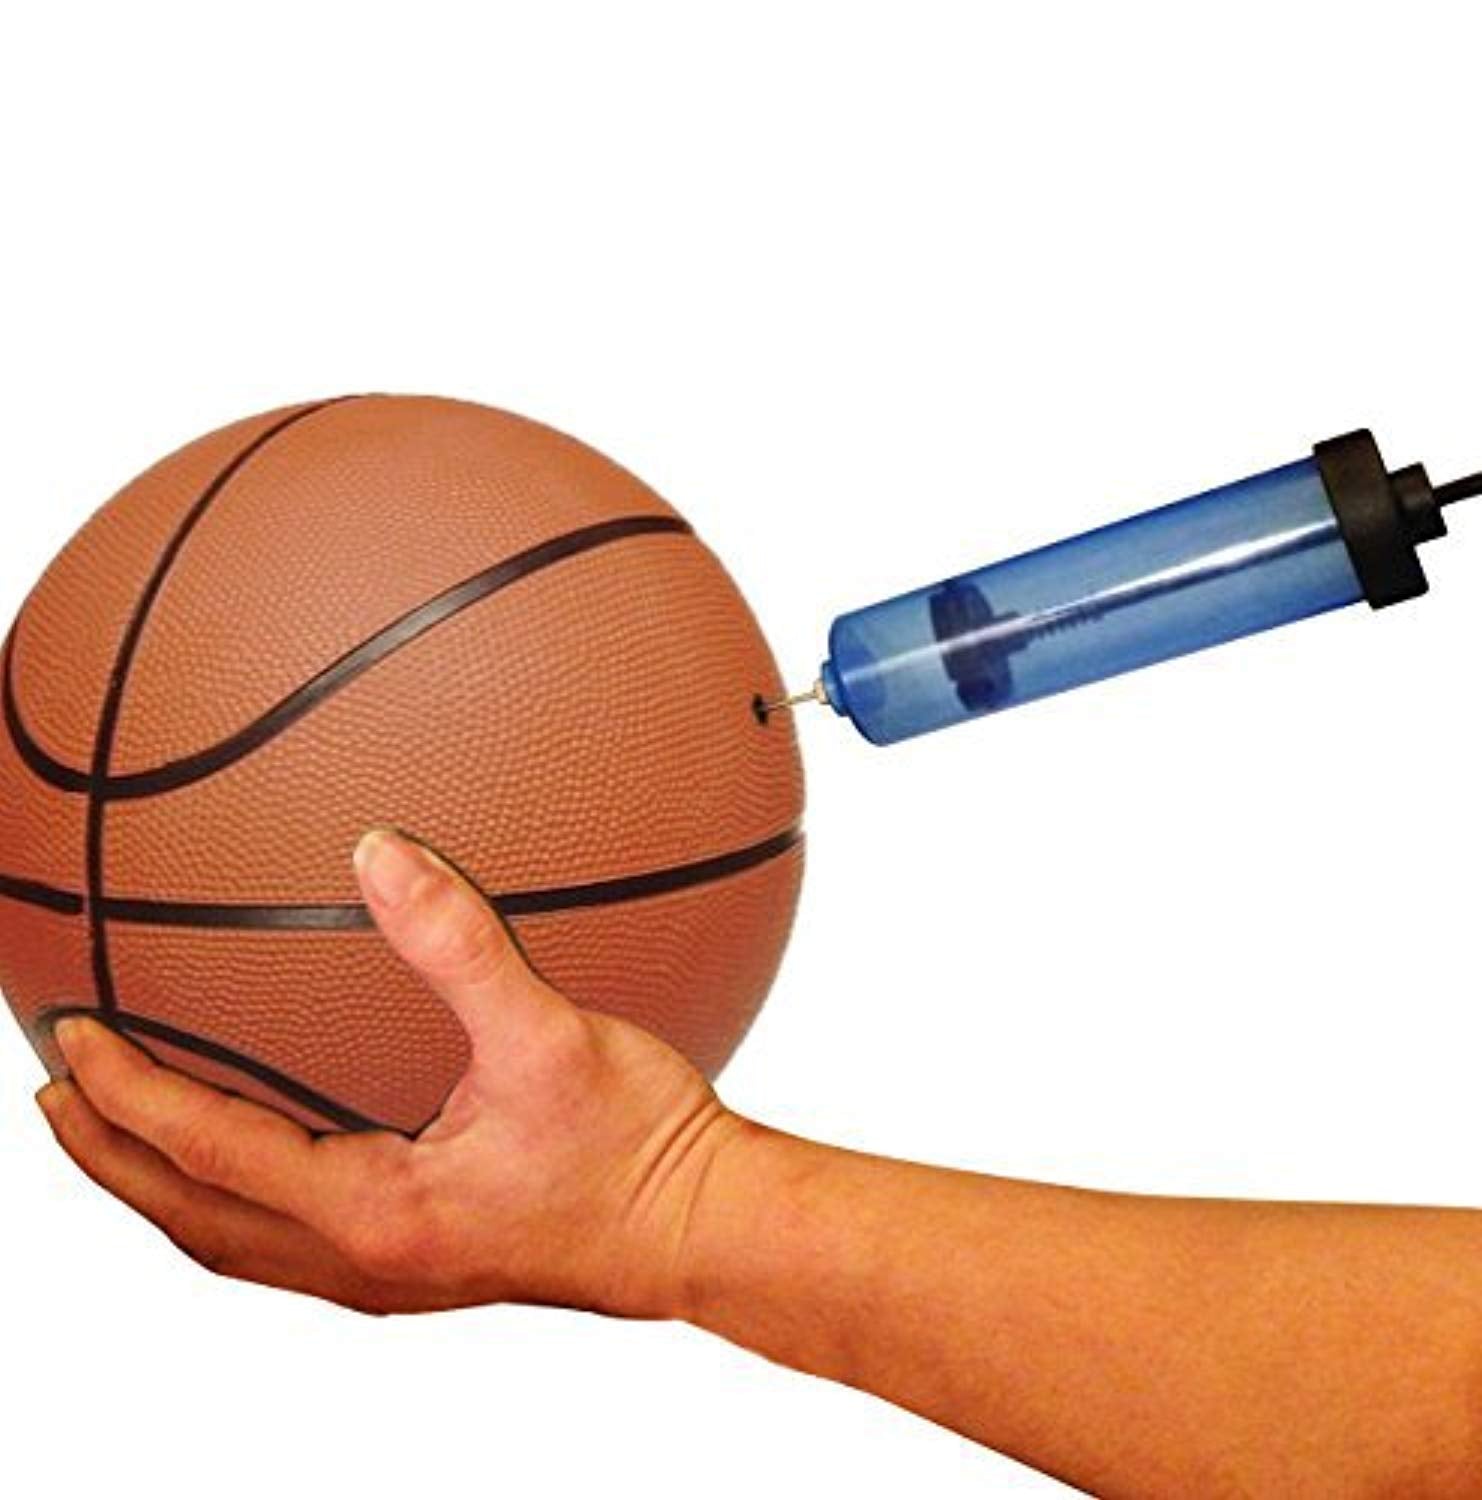 Sports 8-Inch Ball Pump for Any Sports Ball, Soccer Ball, Football, Volleyball, Basketball